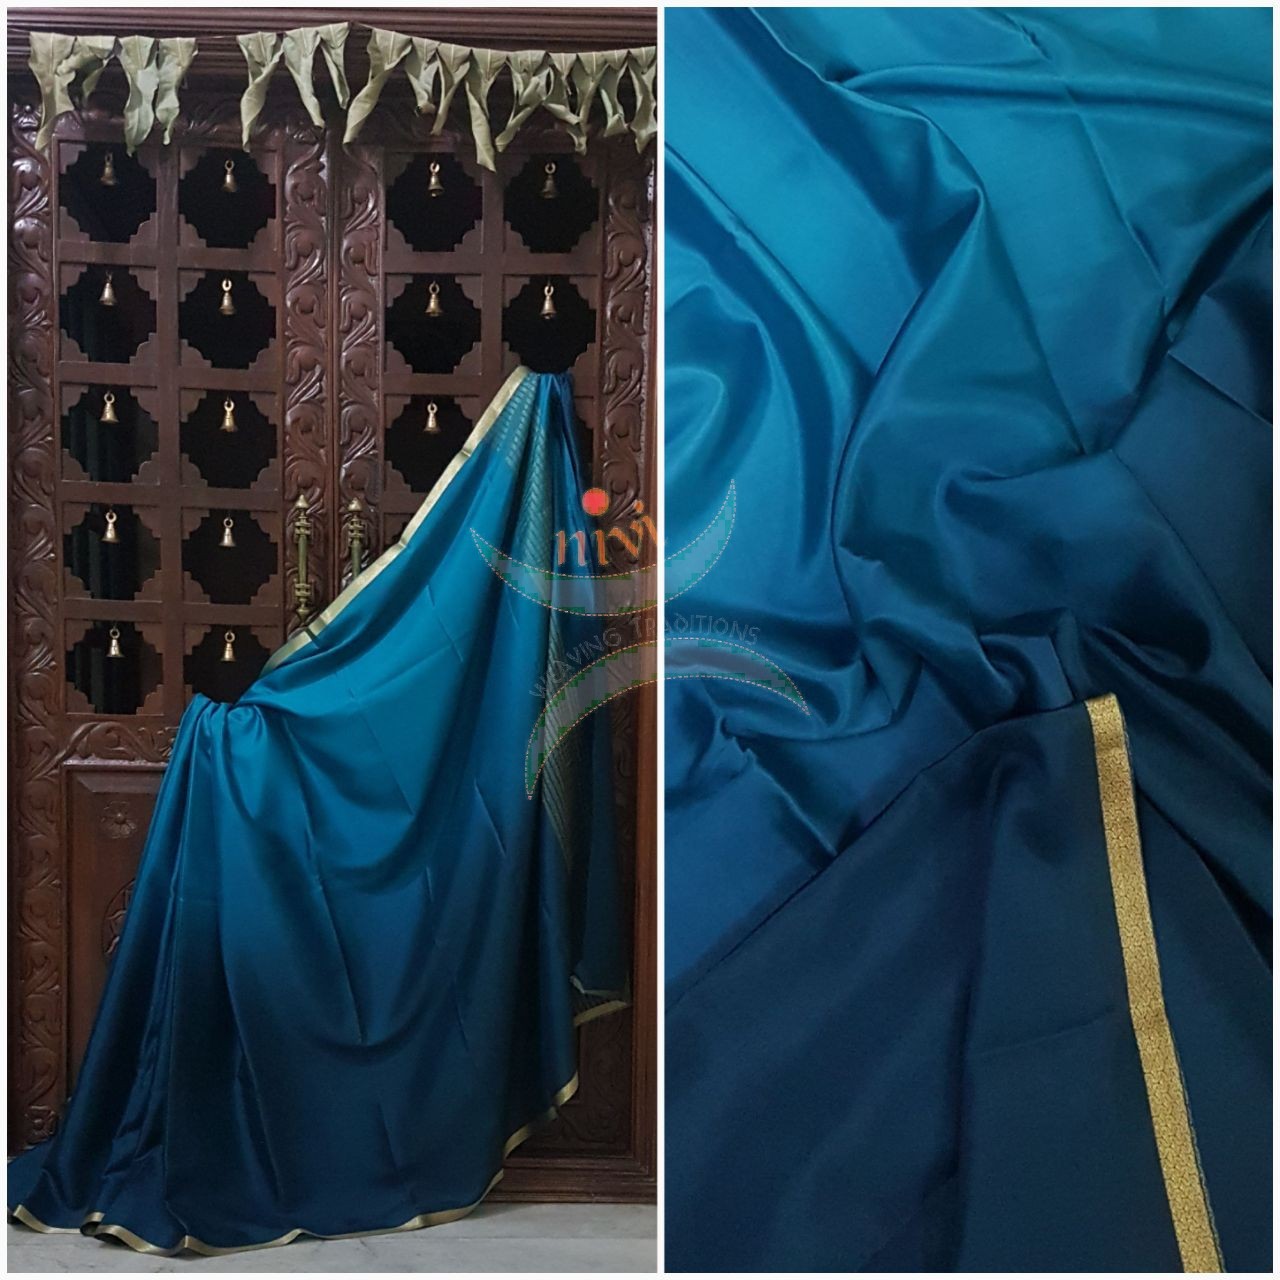 Teal 50 gms Two Tone waterproof pure Silk Crepe with a fine zari border. Saree comes with pure teal crepe blouse in darker tone.